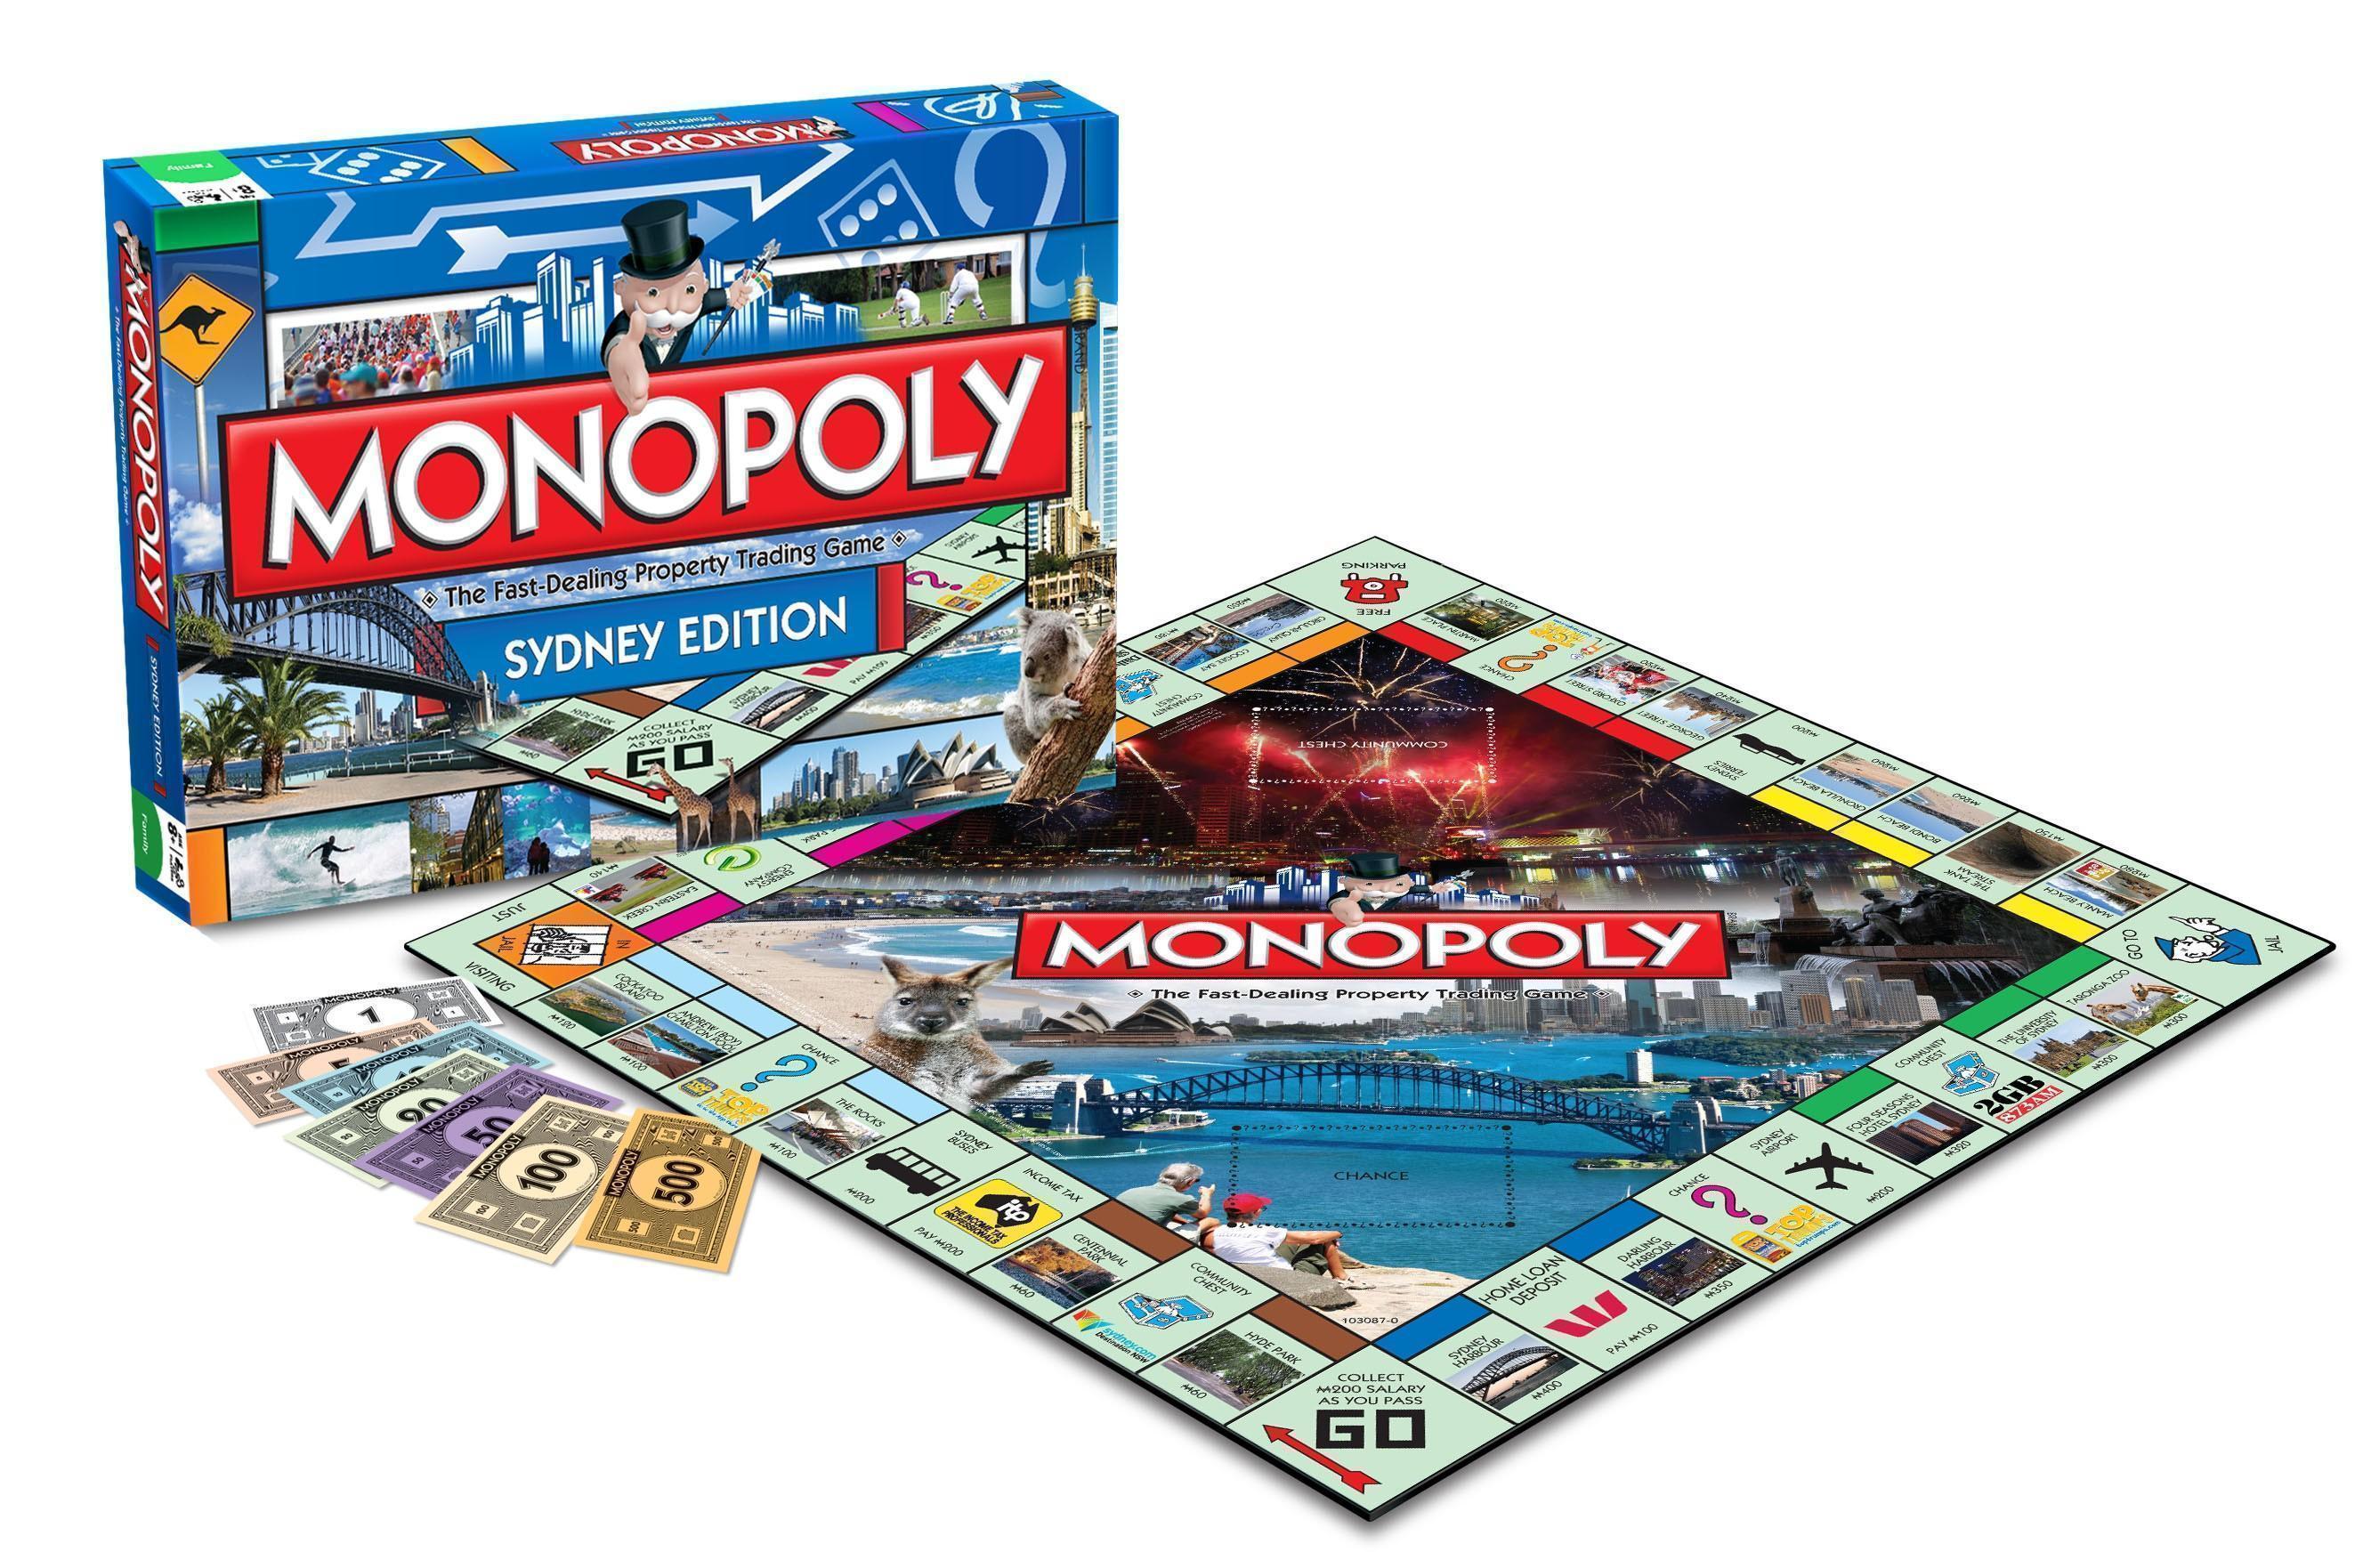 Sydney Collectors Edition Monopoly The Fast Dealing Property Trading Game